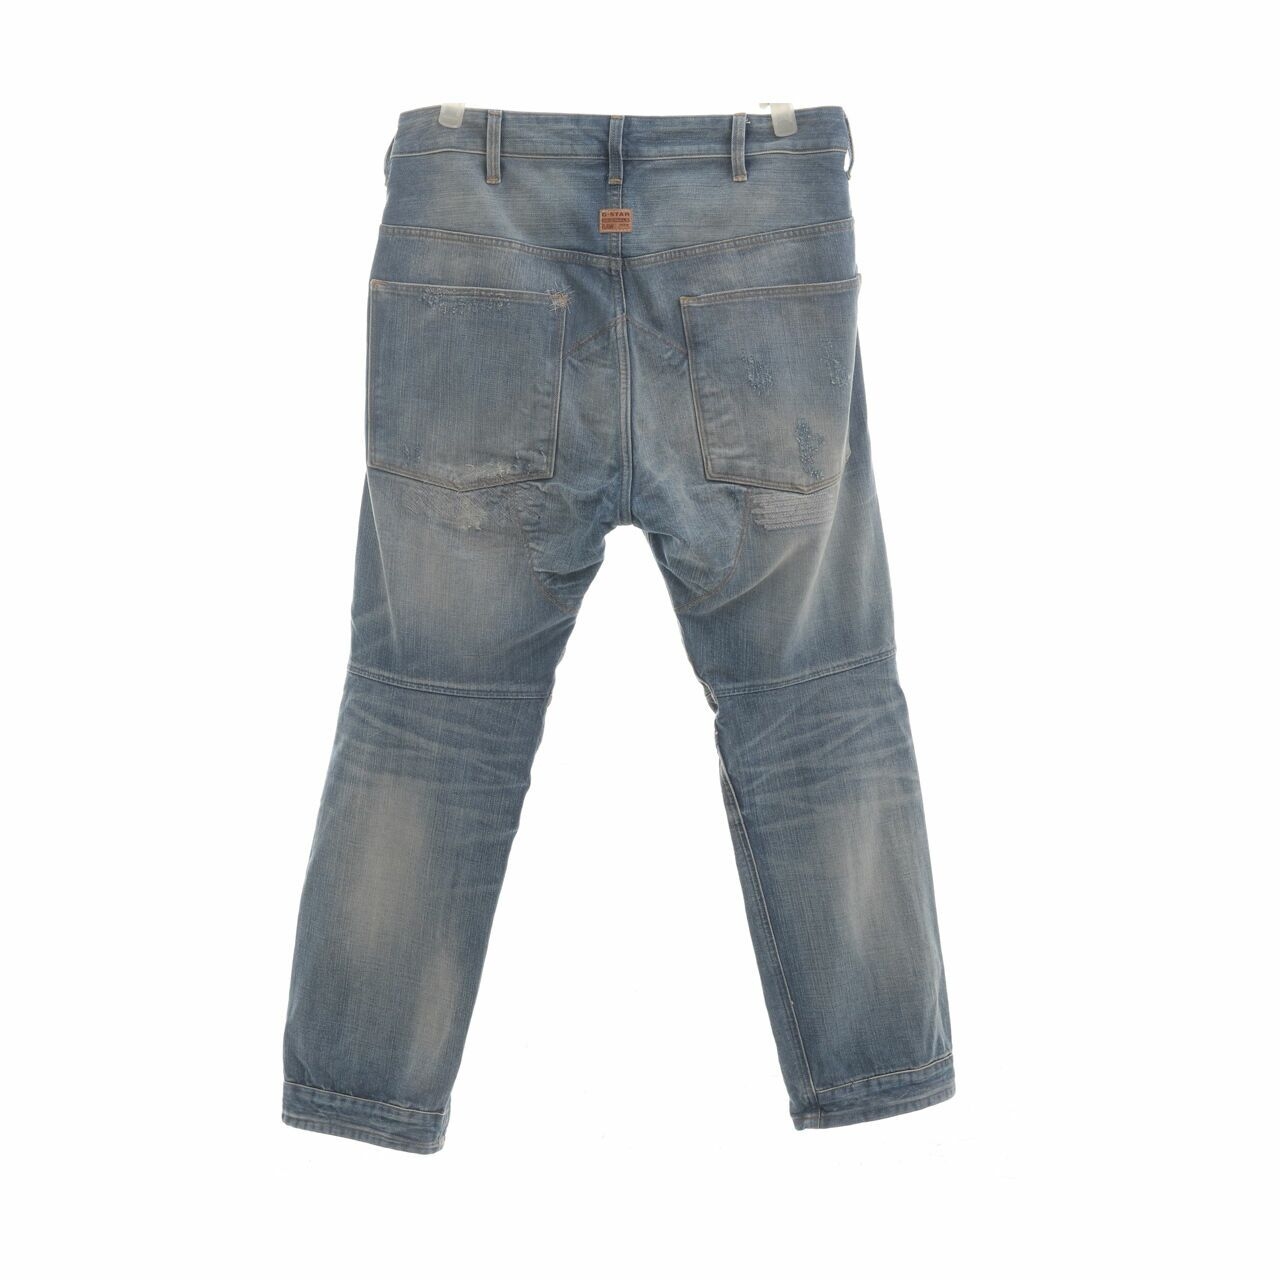 G Star Raw Blue Washed Denim Ripped Long Pants